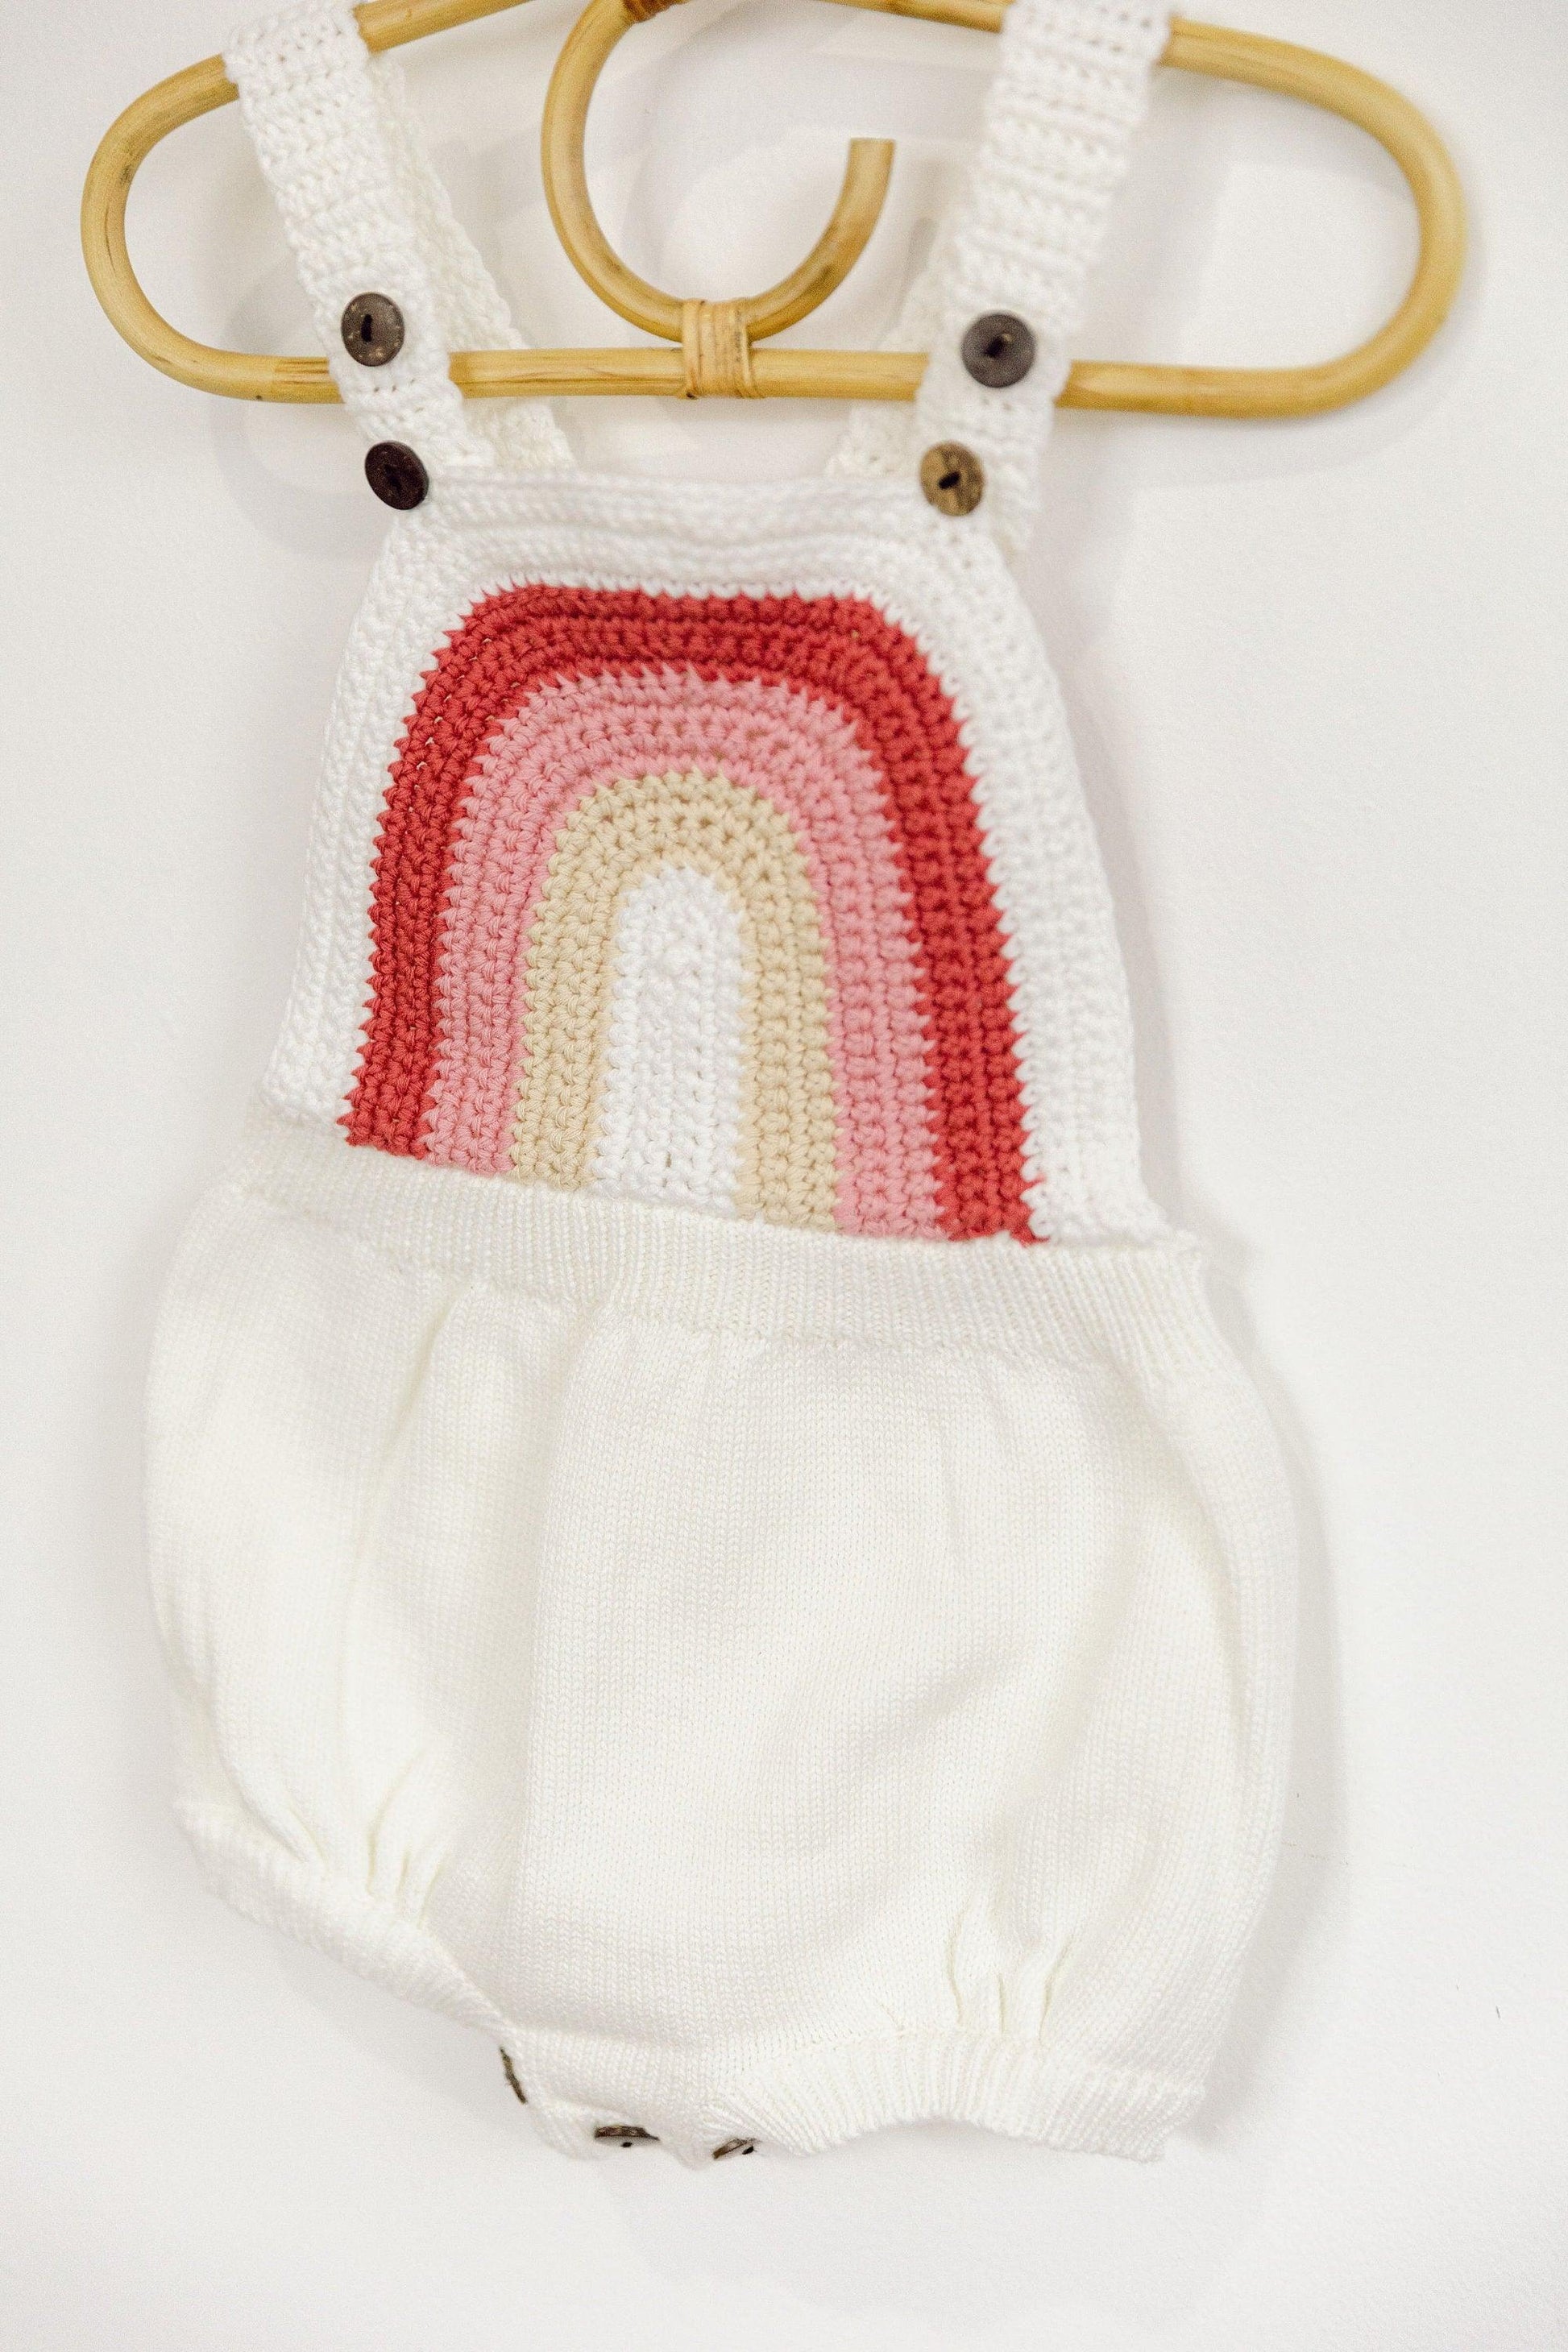 Rainbow Knitted Romper - BellaBerryDesigns